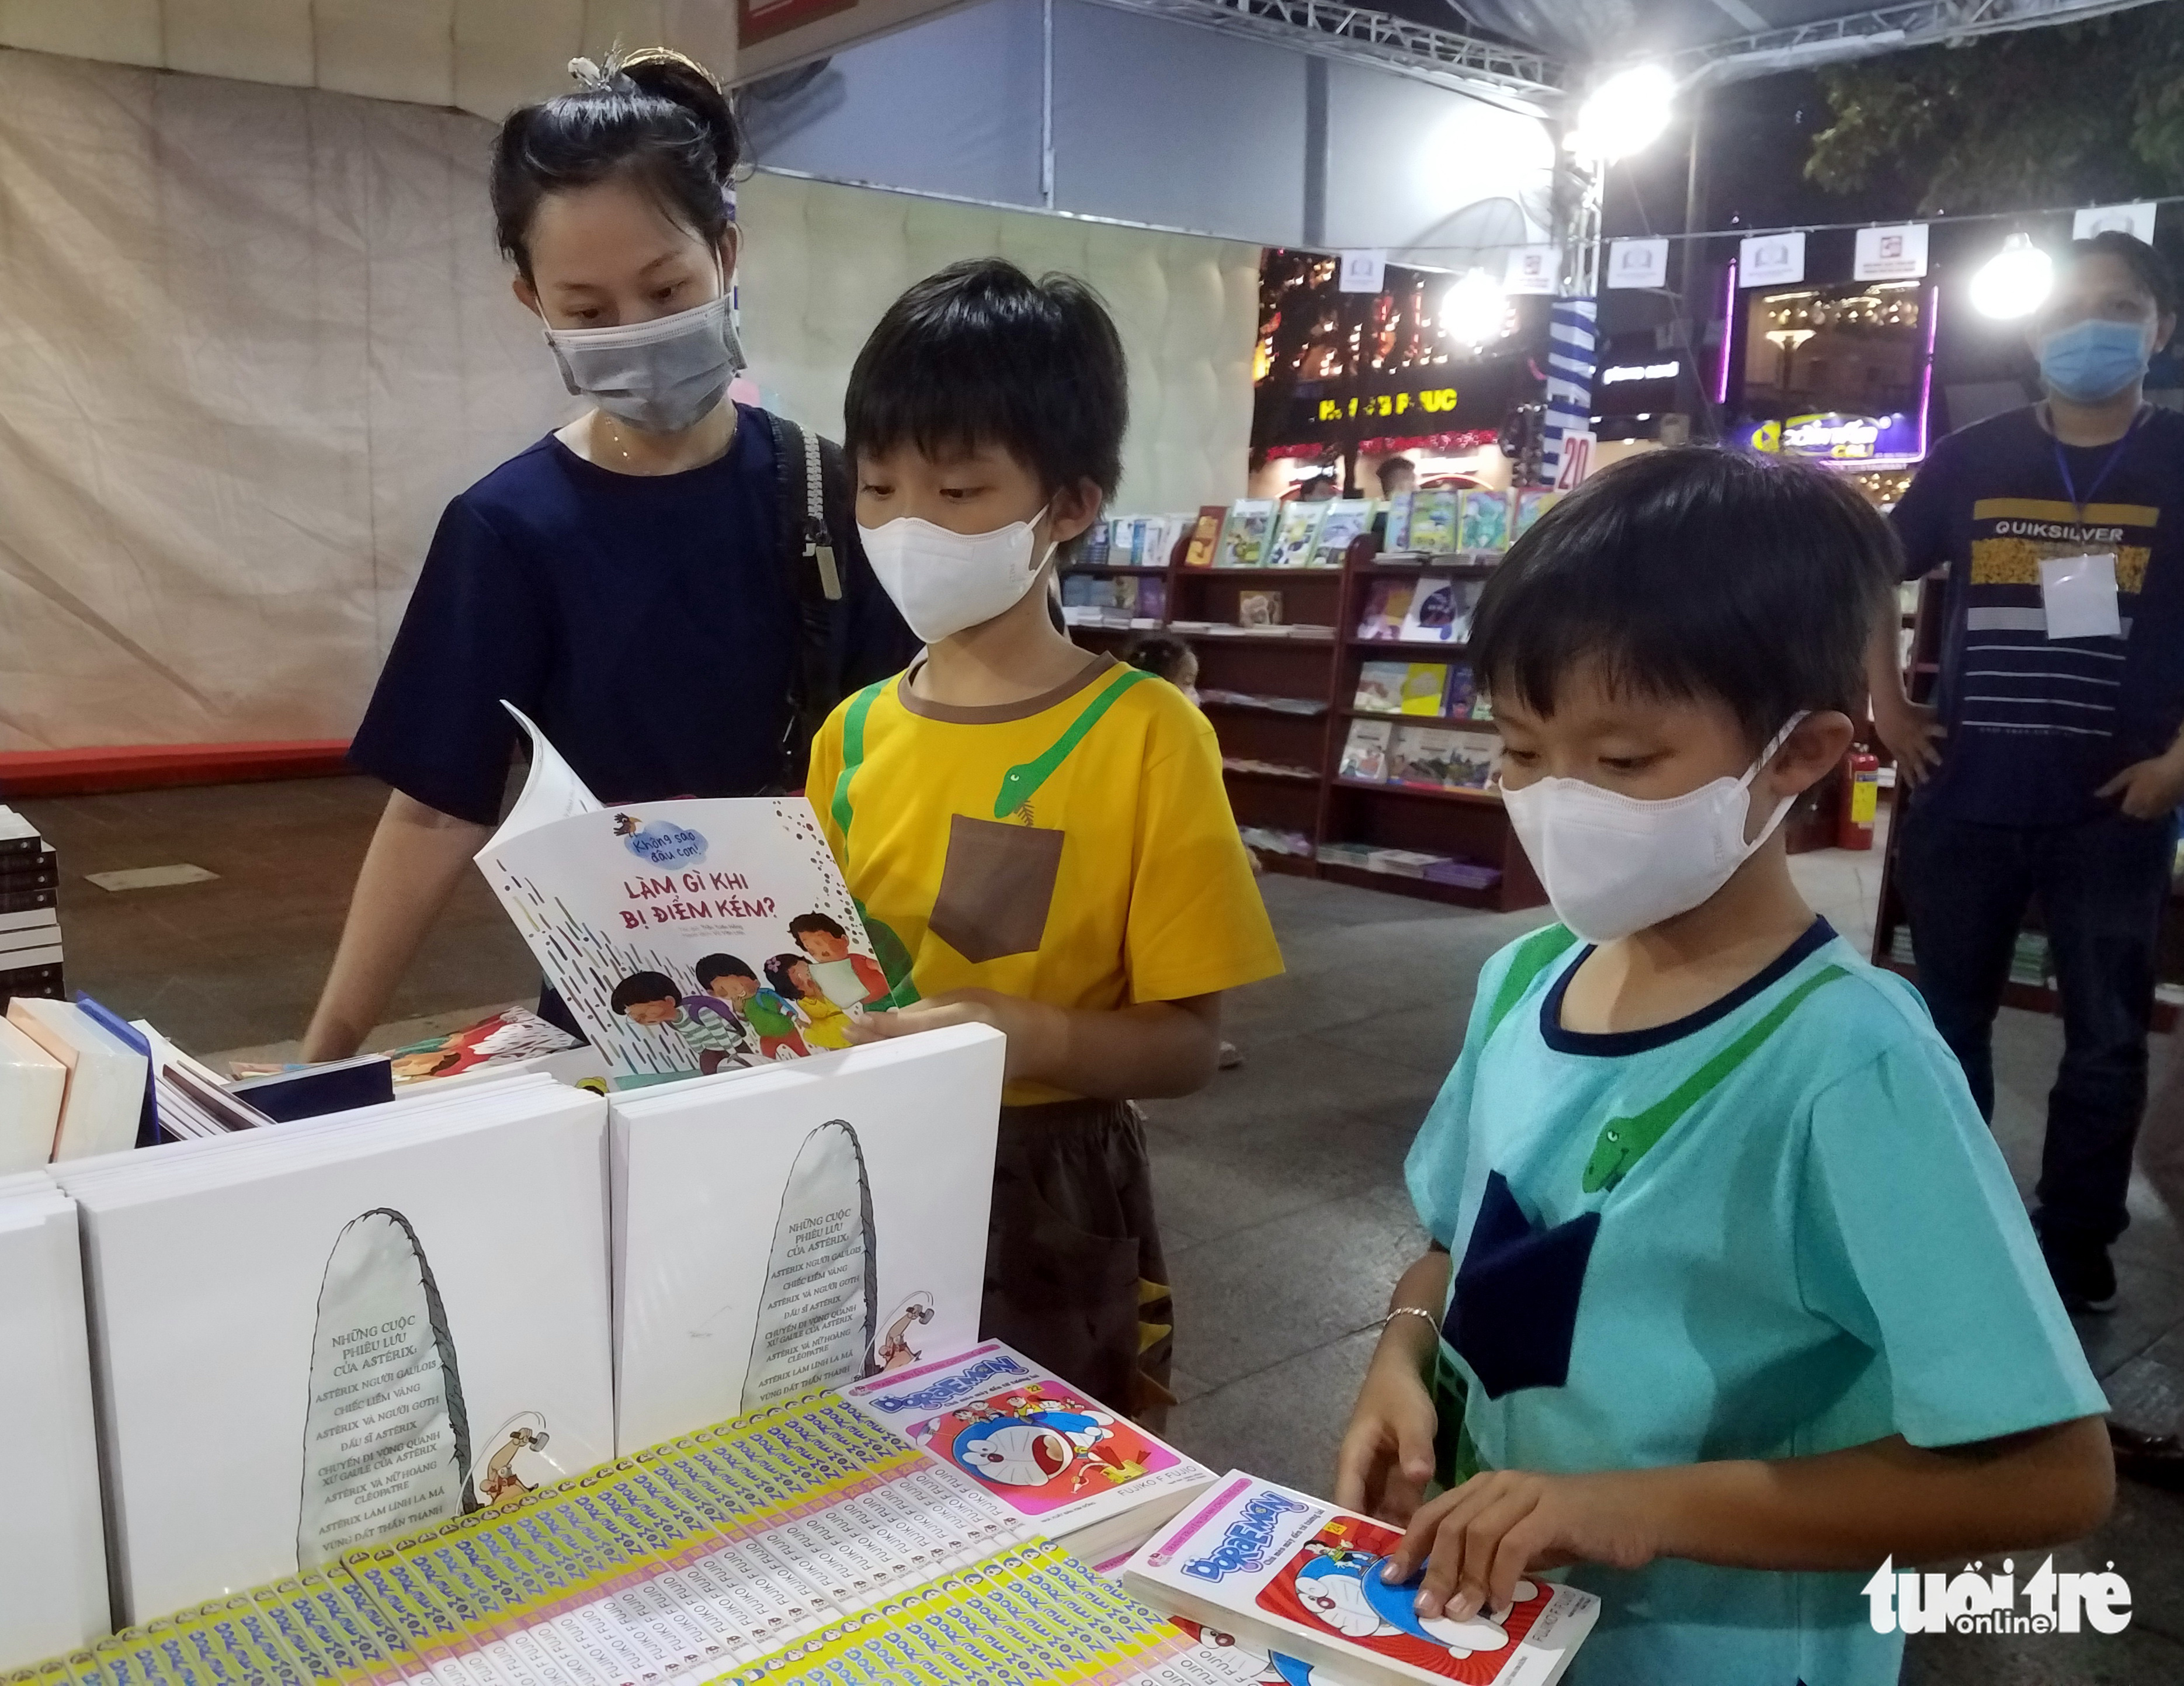 Children read books at the opening ceremony of the first Vietnam Book and Reading Culture Day on Nguyen Hue Pedestrian Street in District 1, Ho Chi Minh City, April 19, 2022. Photo: L. Dien / Tuoi Tre